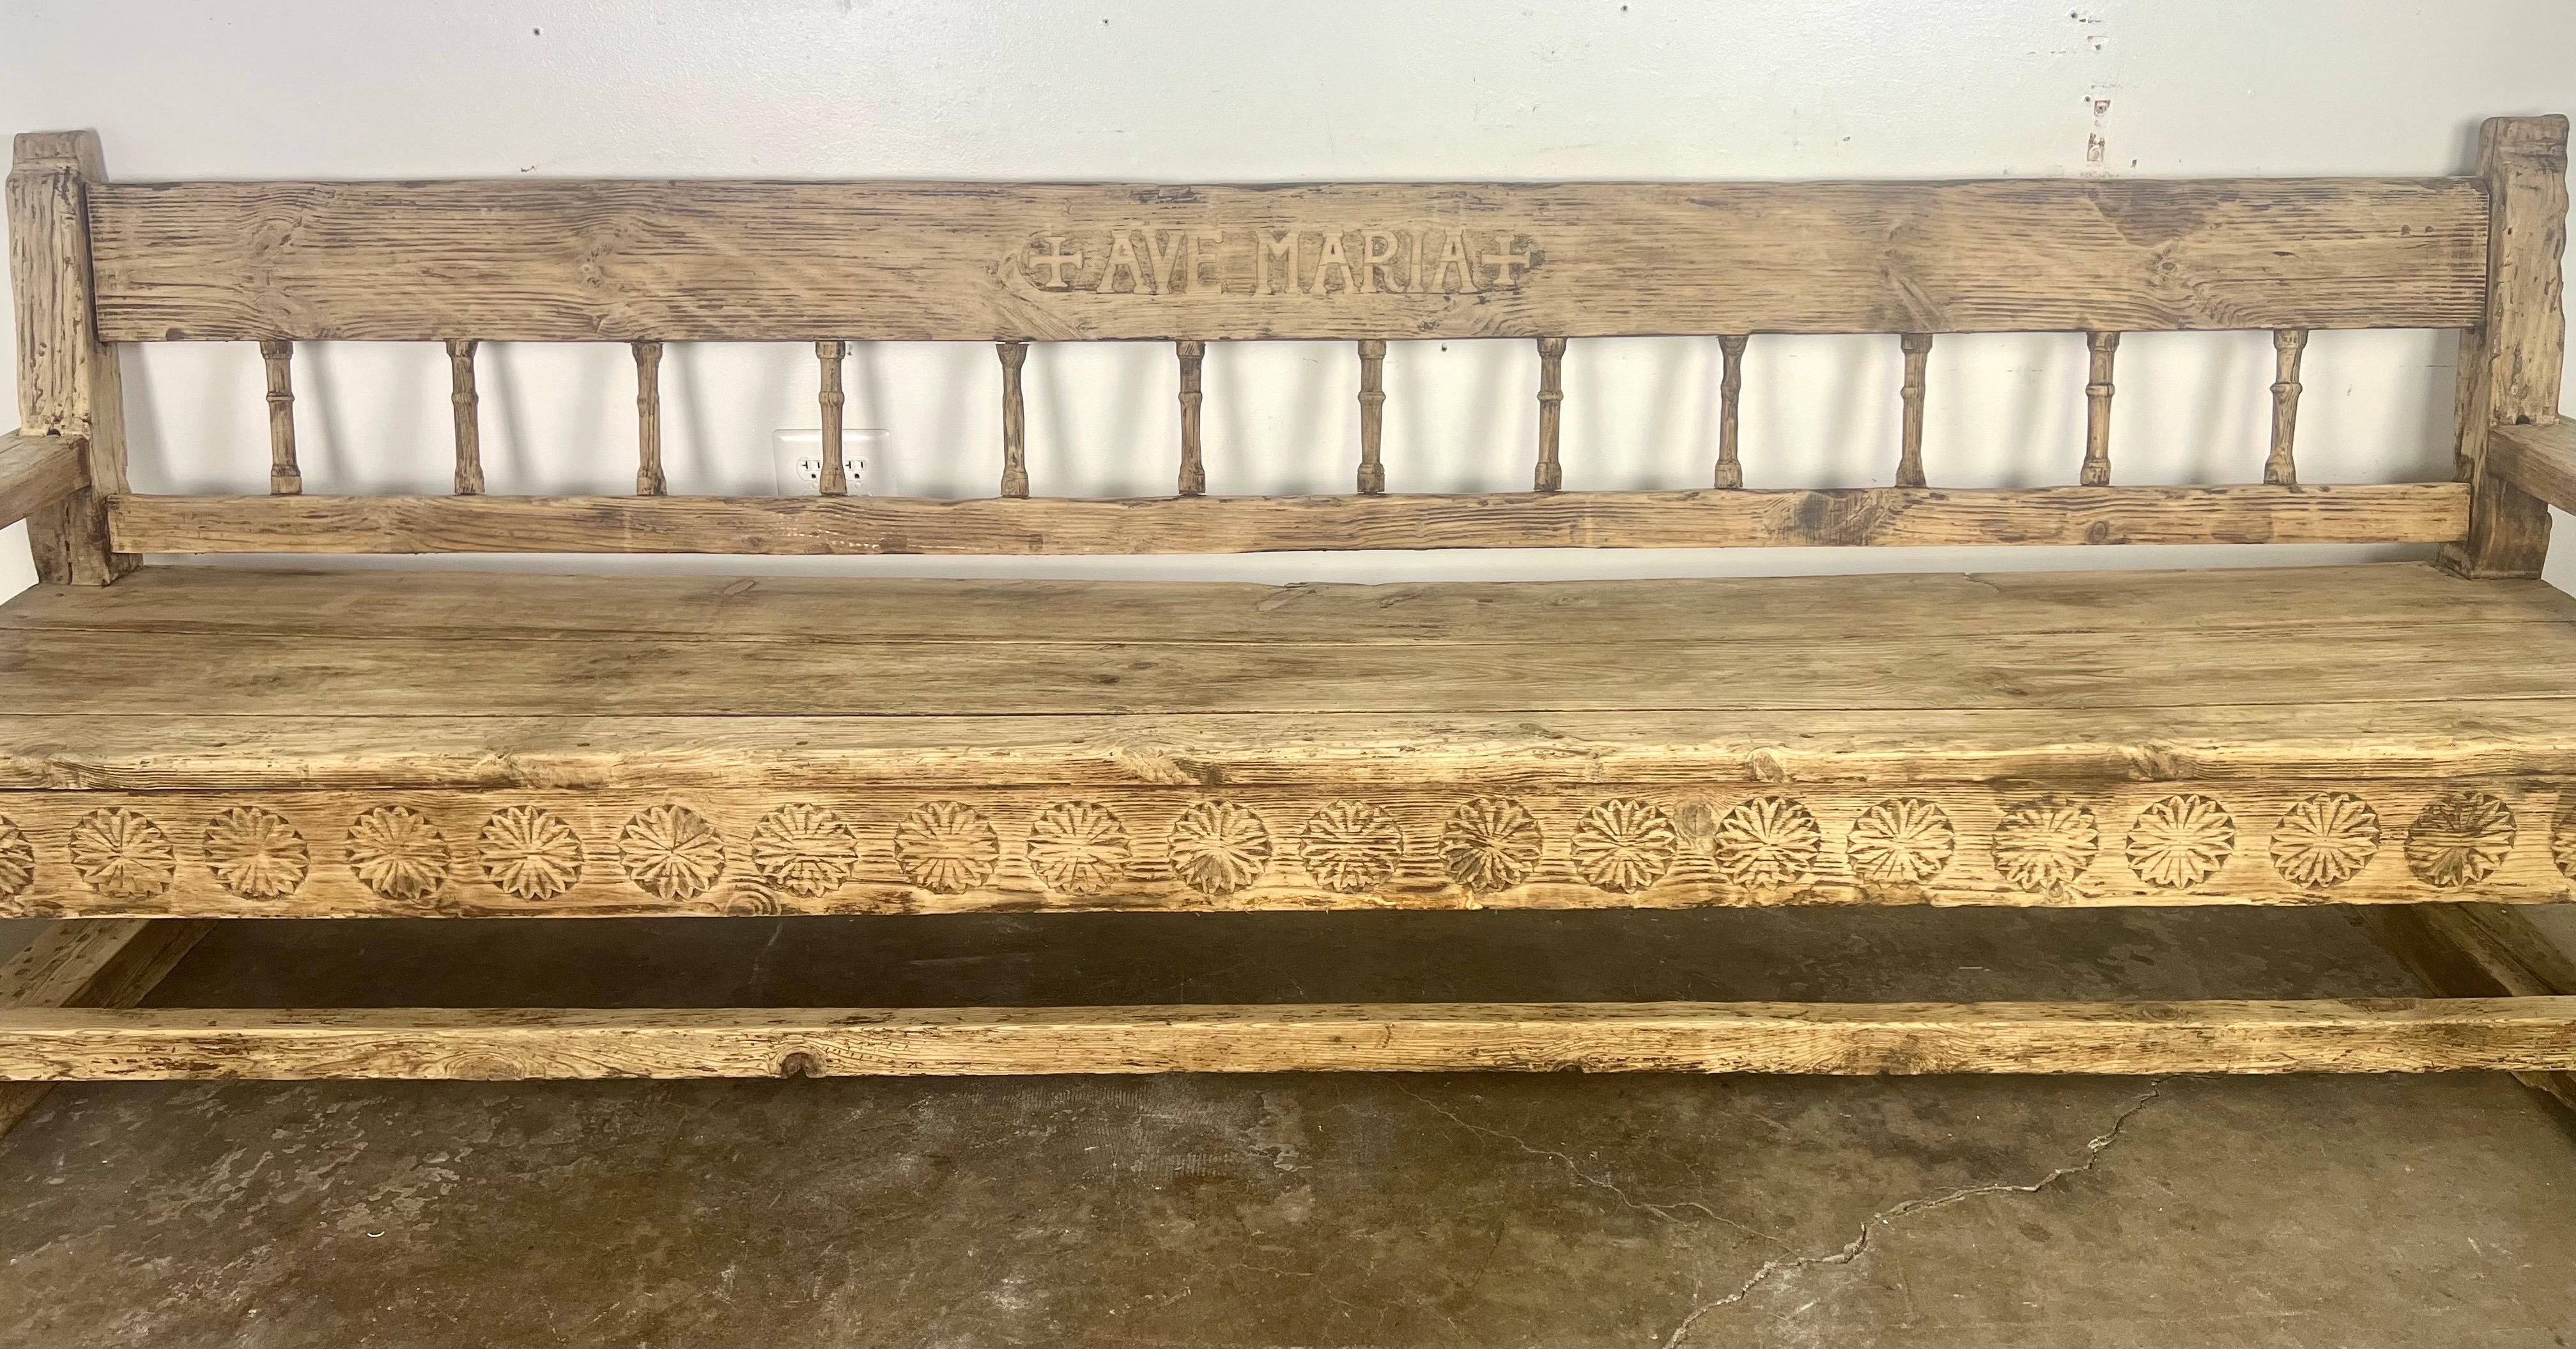 This rustic bench from the late 18th to early 19th century beautifully combines functional design with artistic craftsmanship.  The hand-carved rosettes on the apron add a decorative touch typical of the period, reflecting a fondness for floral